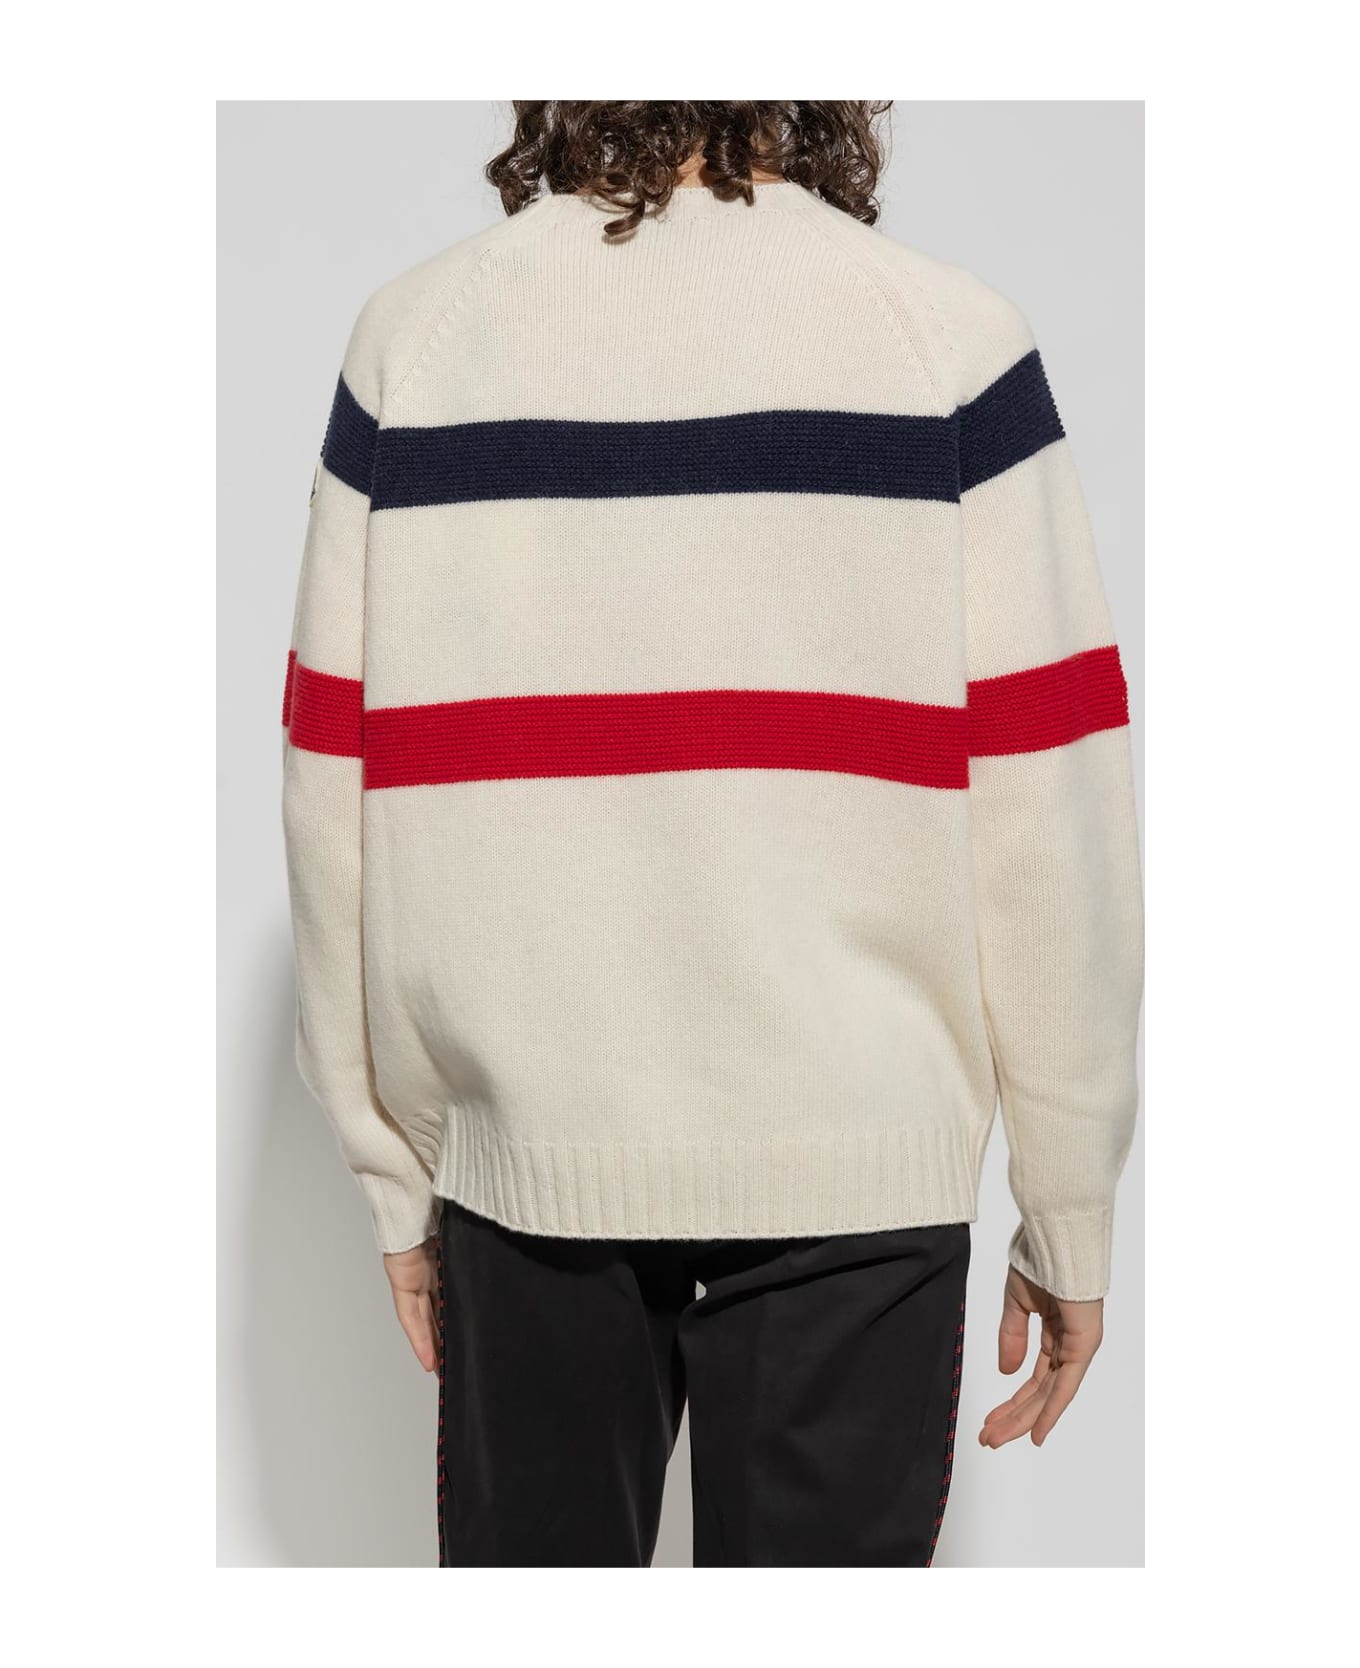 Moncler Tricot Sweater - P07